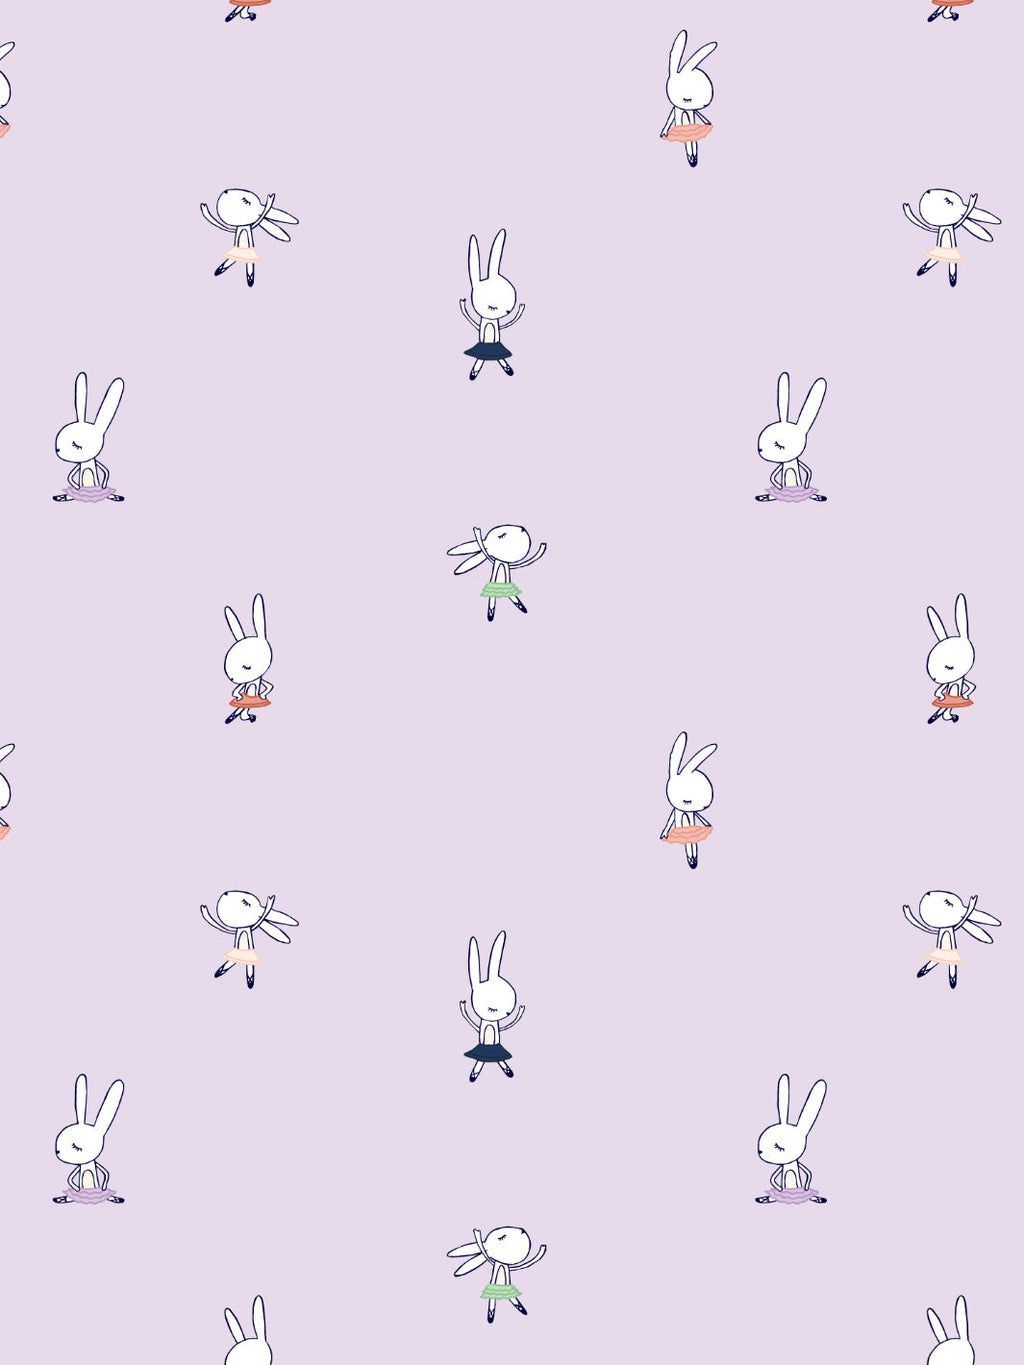 A fun pattern of bunnies in tutus on a light purple background - Ballet